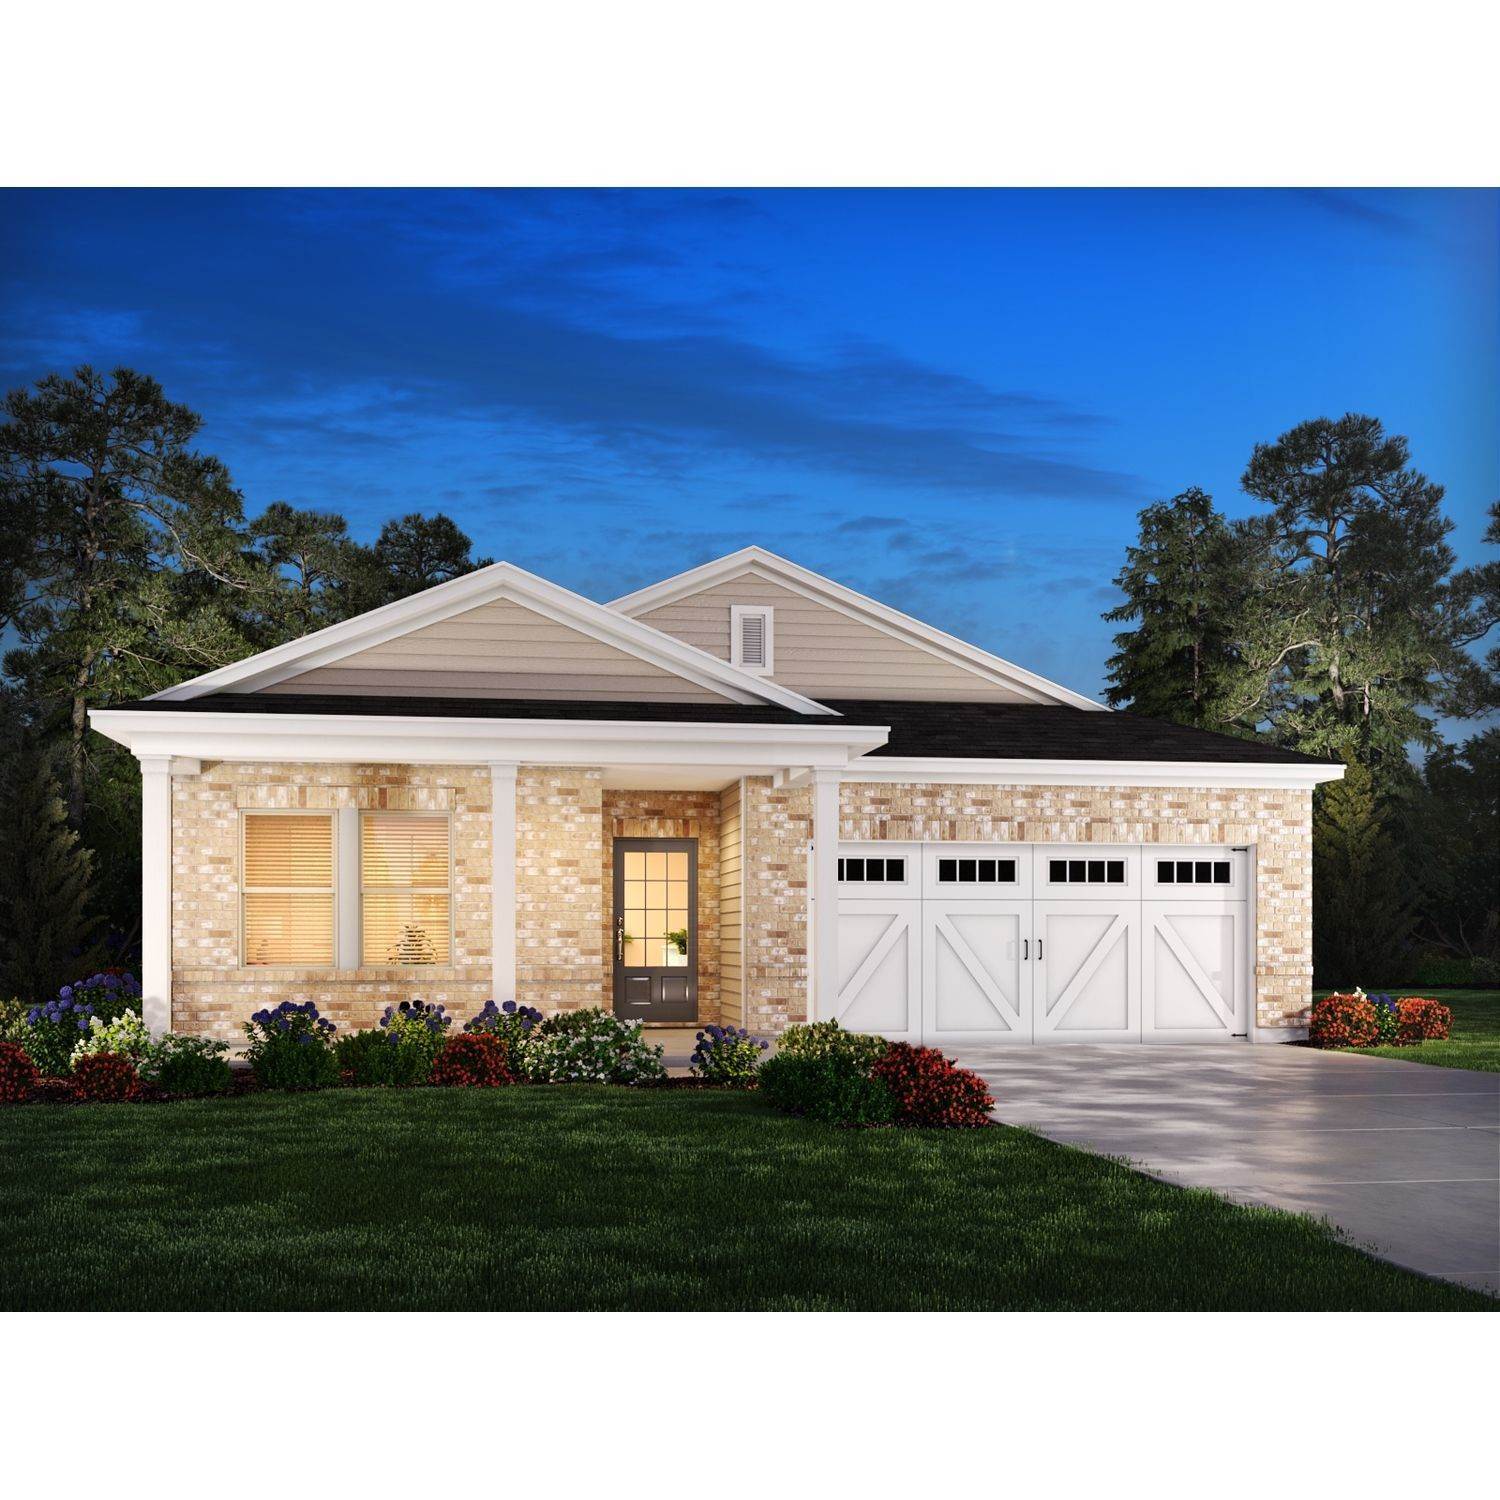 Single Family for Sale at The Woods At Dawson - Newport 3185 Dawson Forest Road DAWSONVILLE, GEORGIA 30534 UNITED STATES